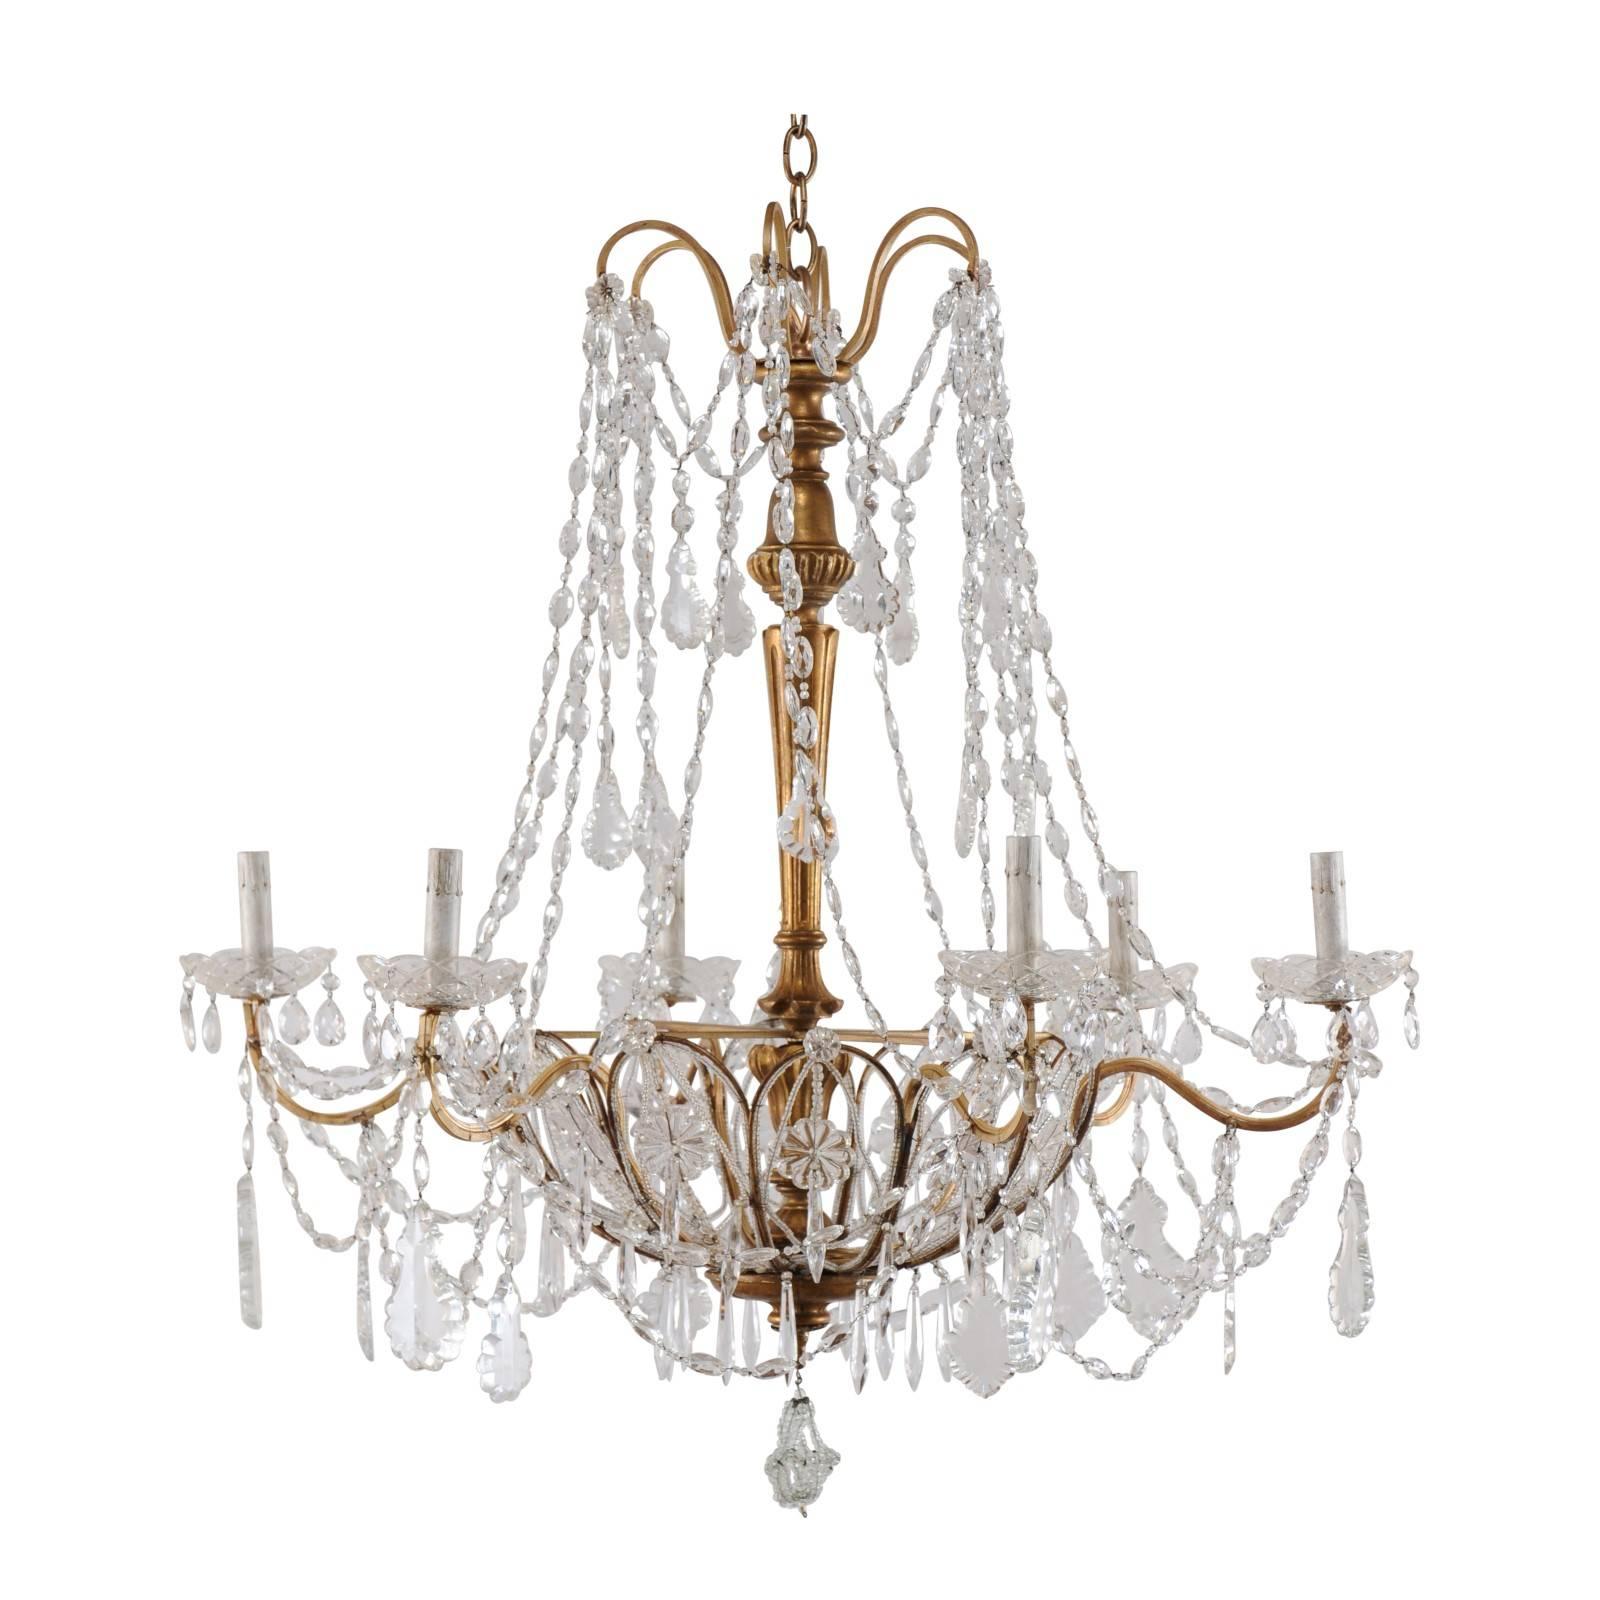 Italian Basket Shaped Elegant Crystal Chandelier with Carved and Gilded Column